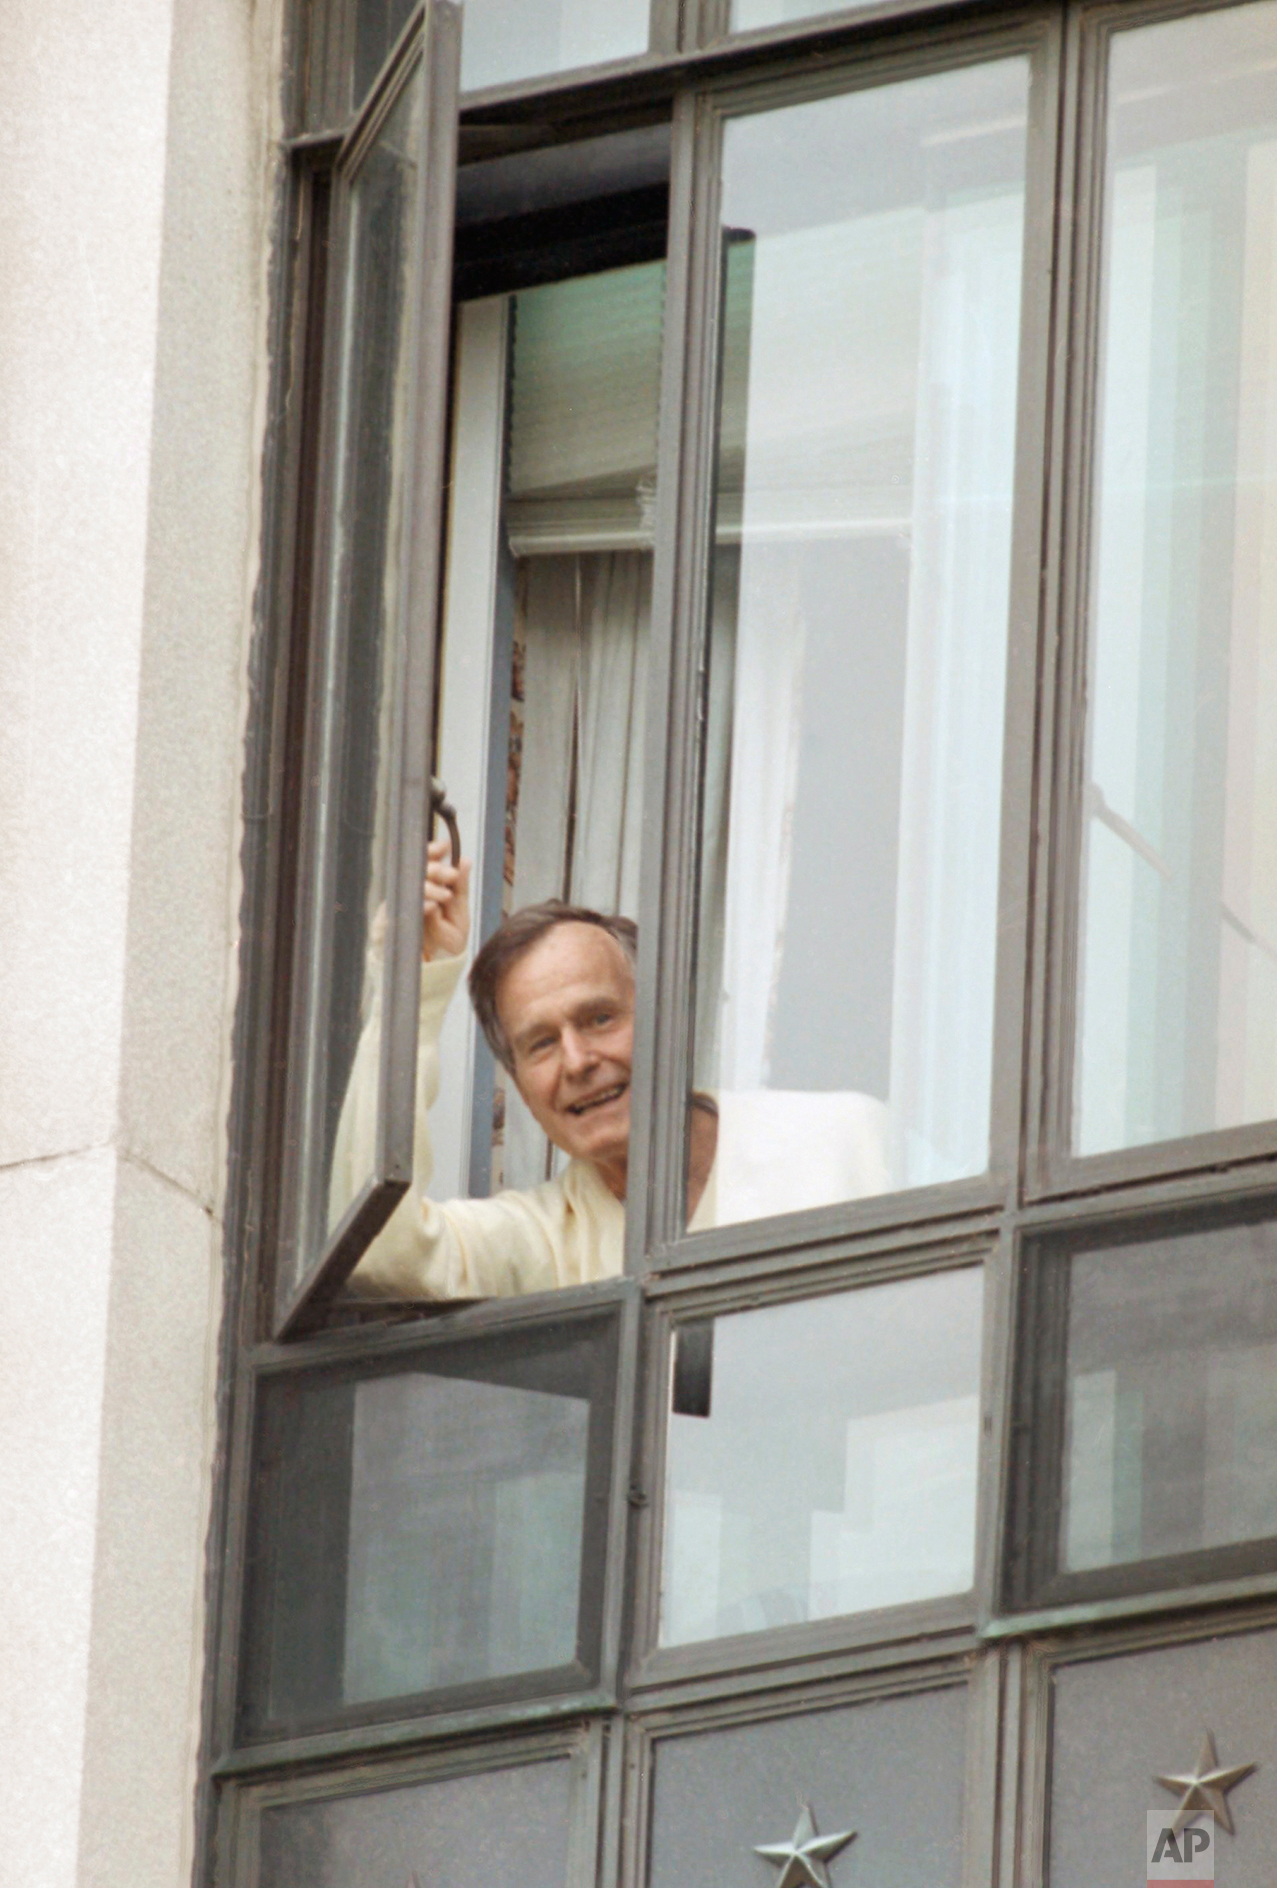  President George Bush talks with reporters from his window at Bethesda Naval Medical Center in Bethesda, Md., May 5, 1991. "Don't worry about me," the president shouted to the reporters. The president's heartbeat is still irregular, however tests ha